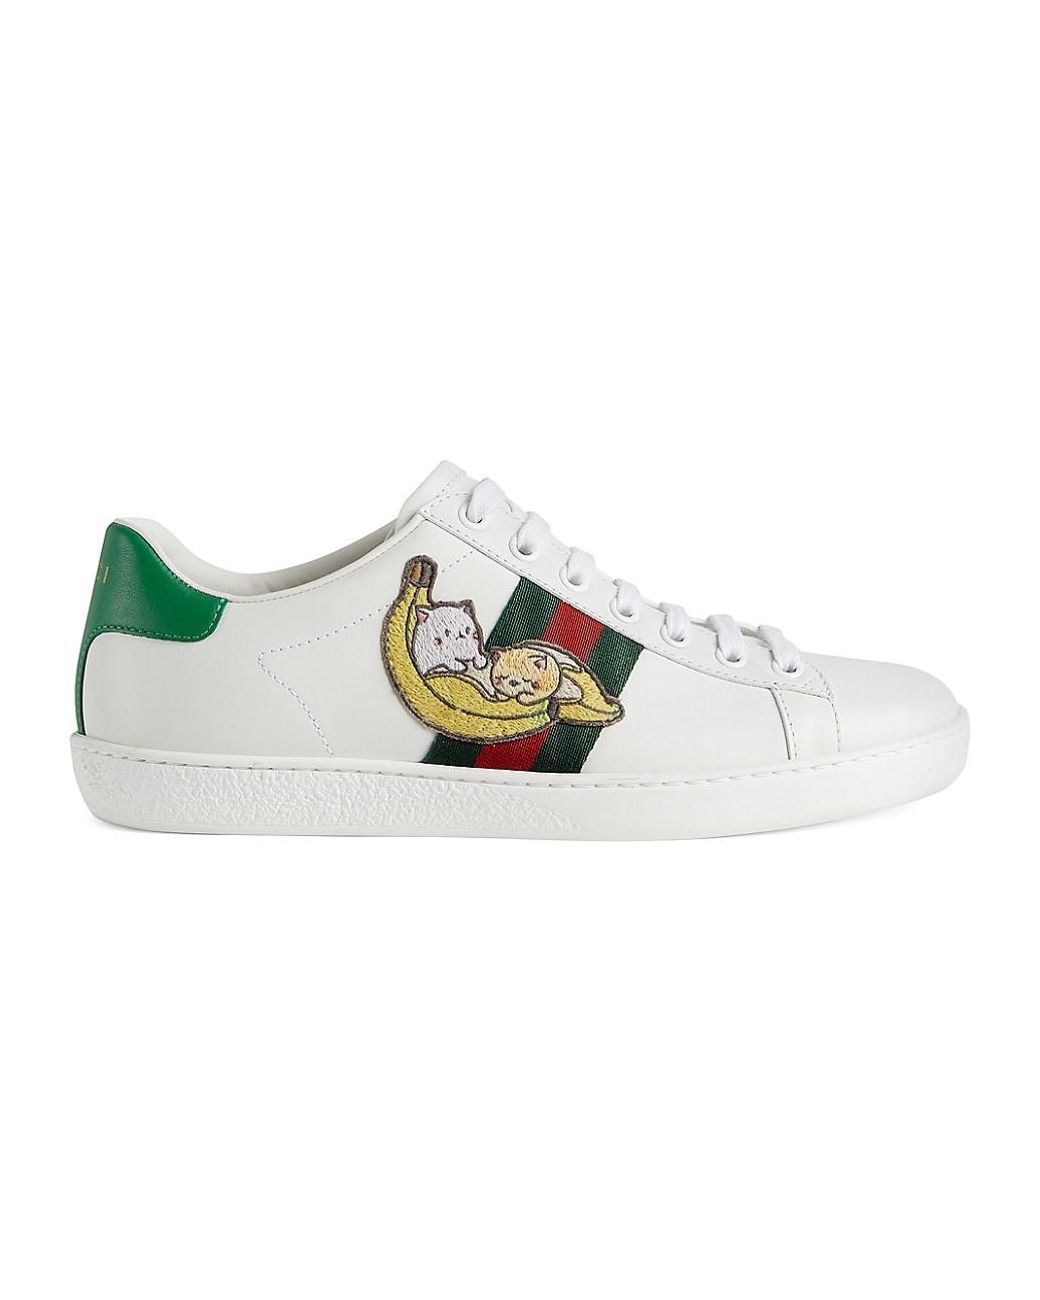 Gucci Leather Bananya X Ace Sneakers in White - Save 10% - Lyst